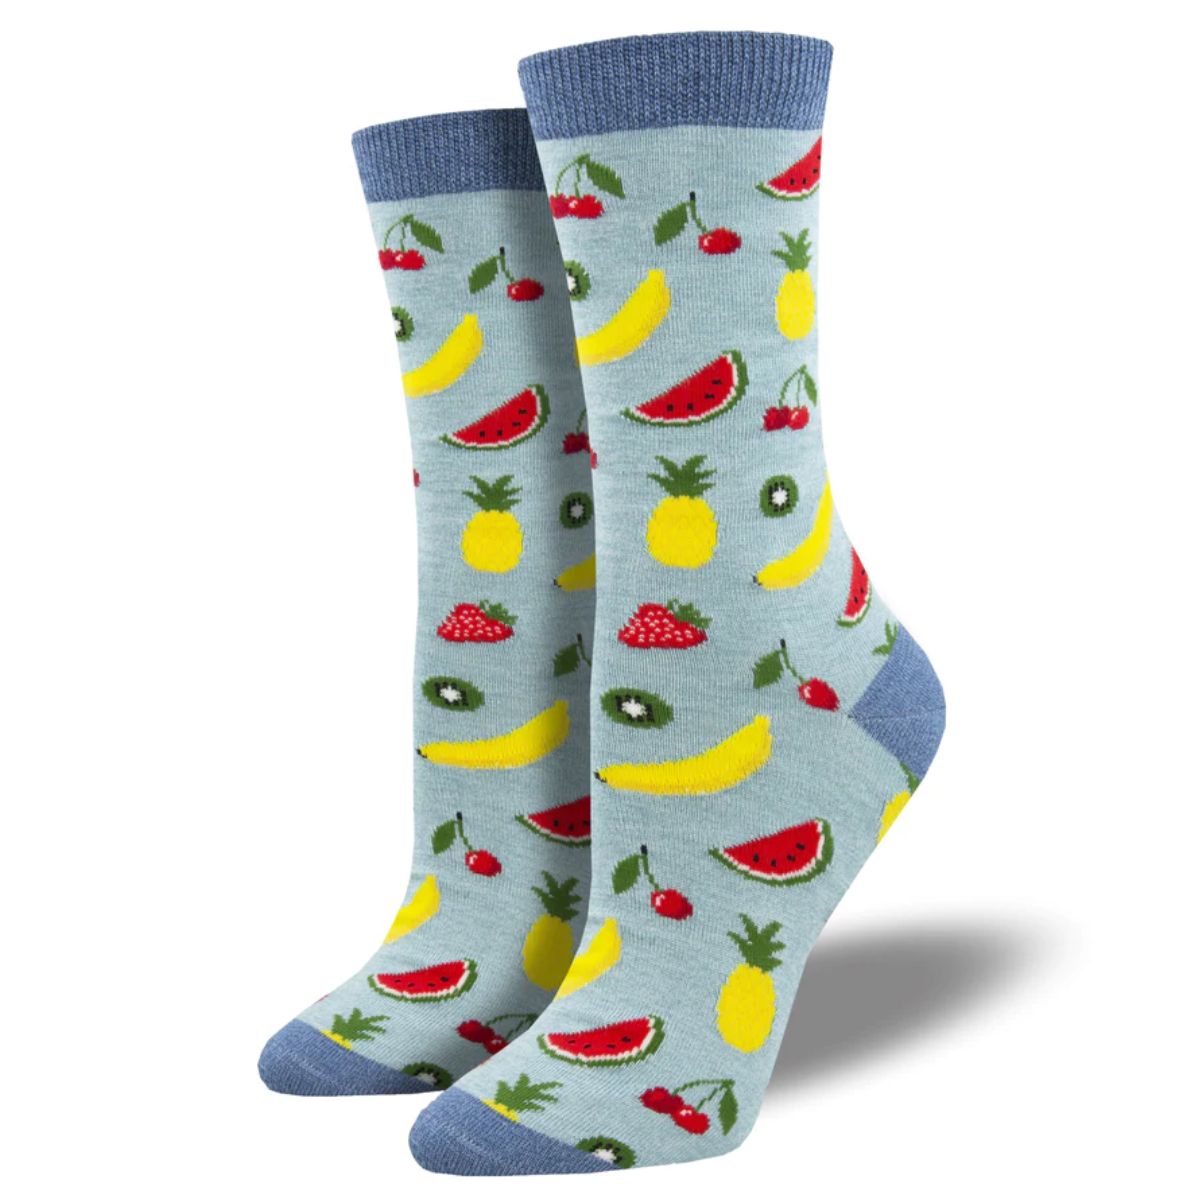 Lets get fruity socks a pair of light blue crew socks with fruit print